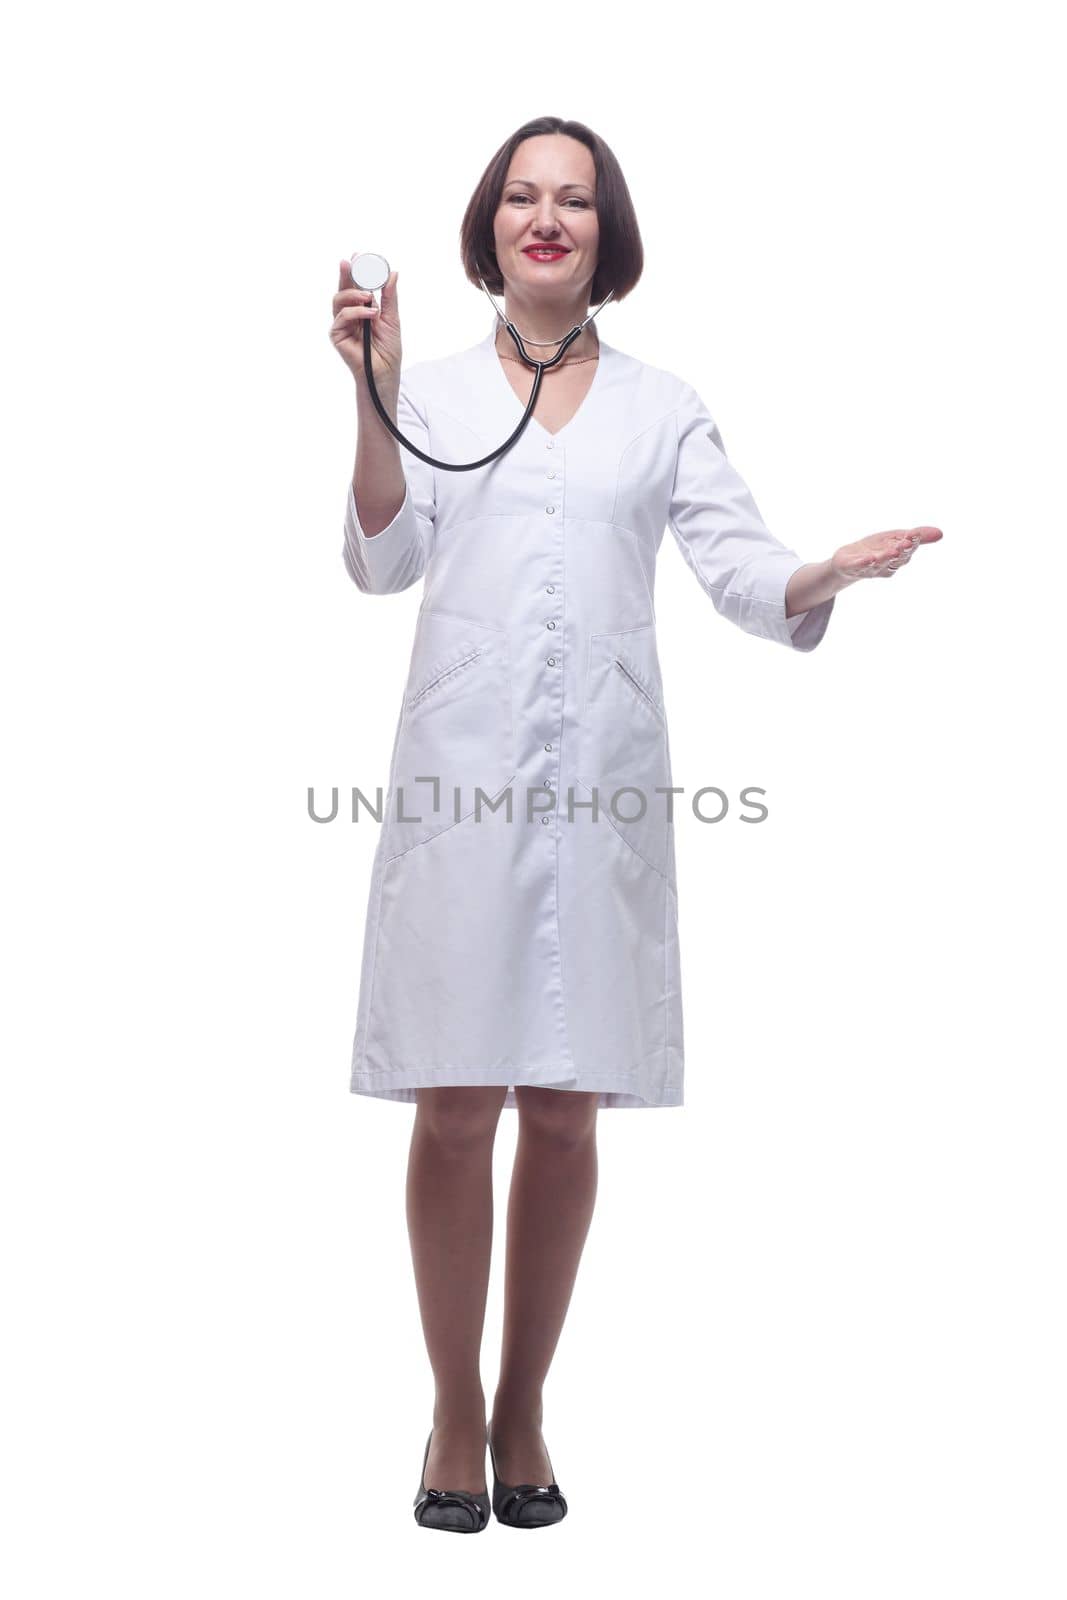 in full growth. confident female doctor holds her stethoscope . isolated on a white background.